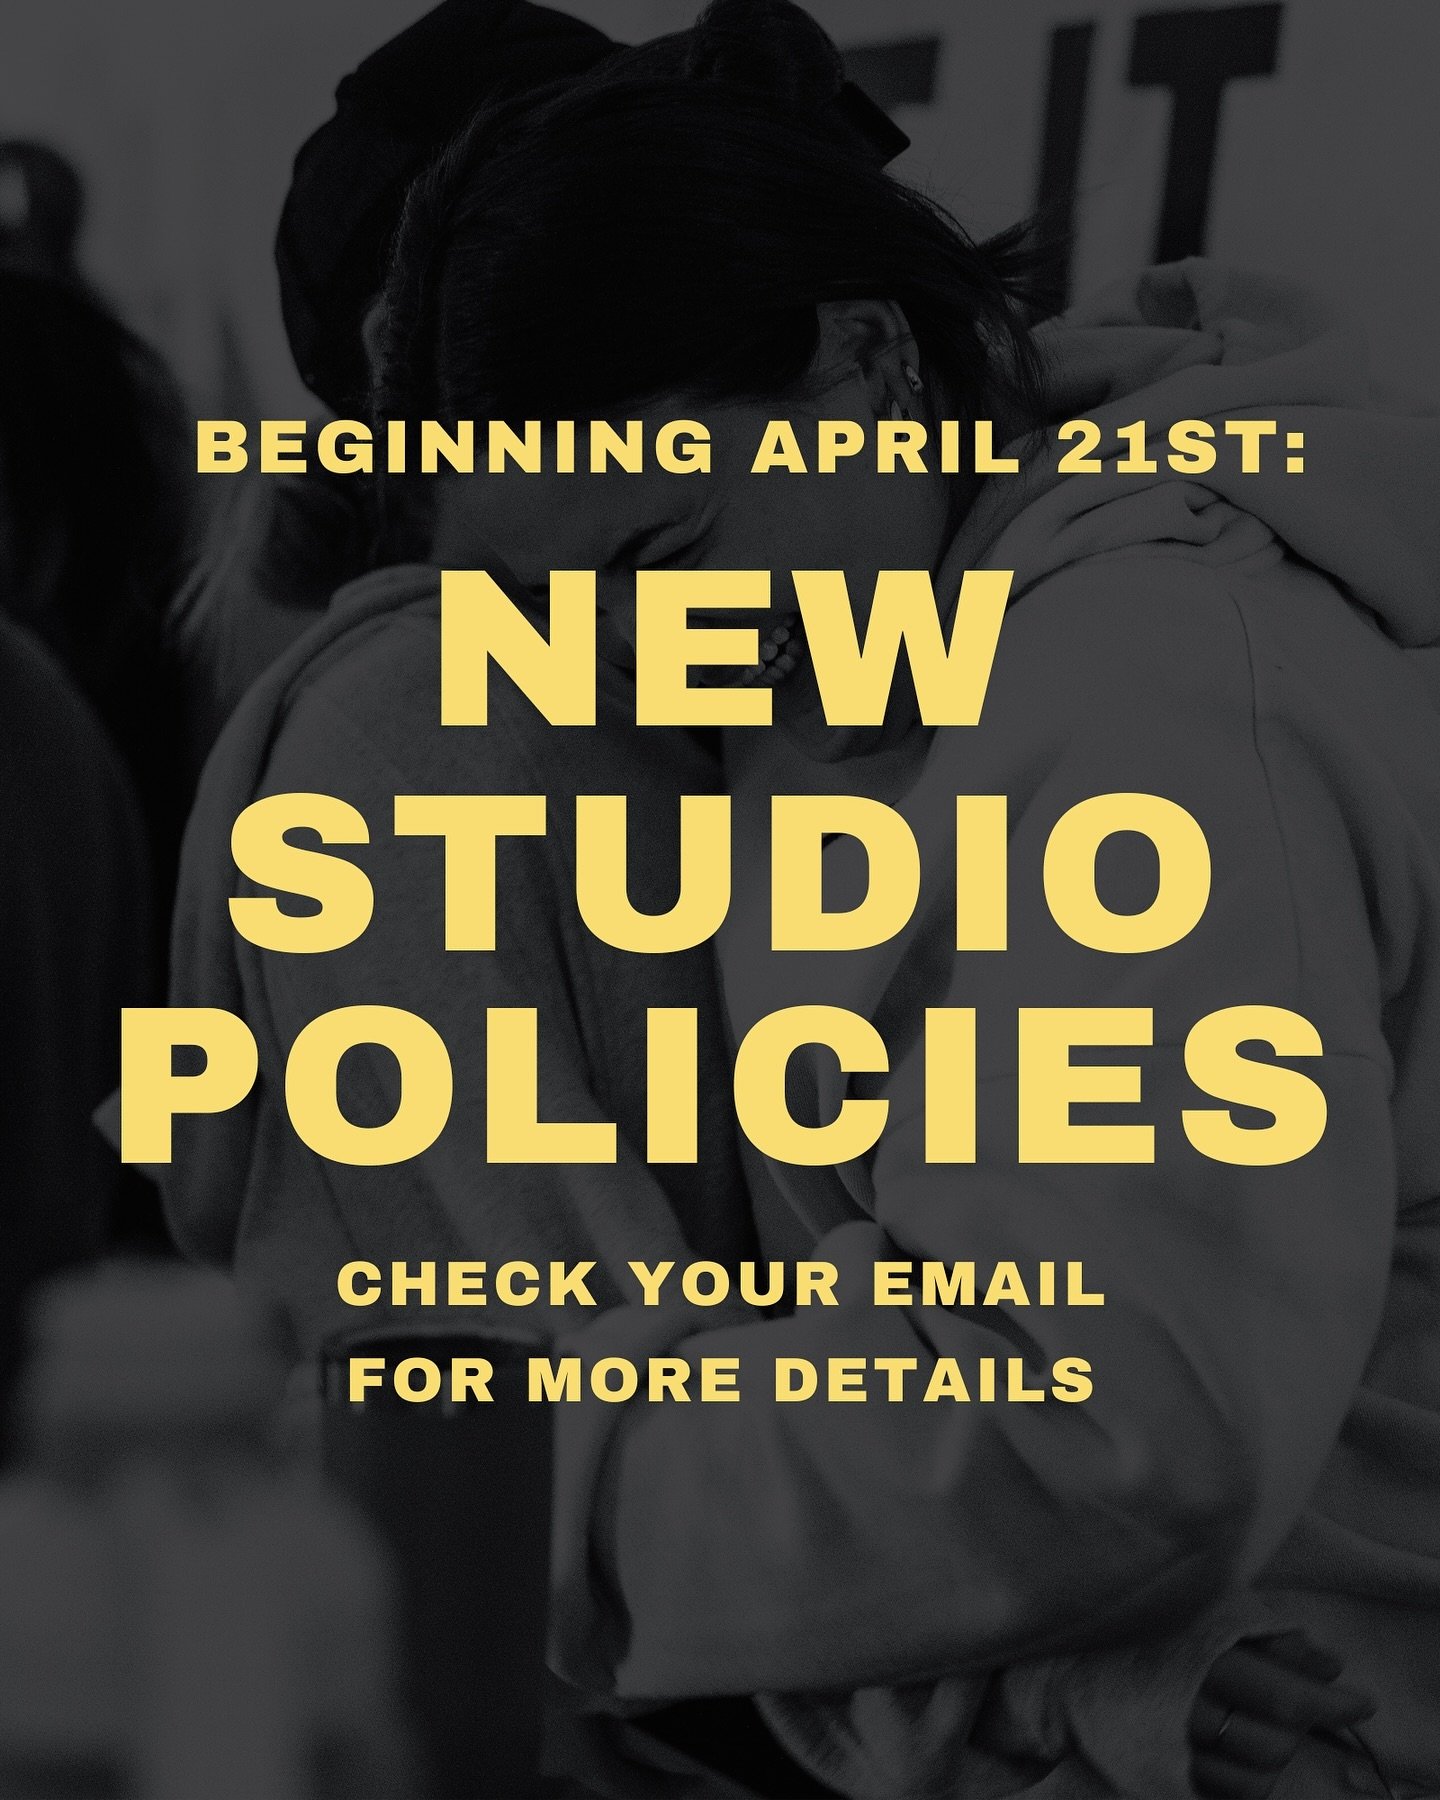 NEW POLICIES GO INTO EFFECT TODAY, 4/21. 📣

Grit fam, we sent a detailed email yesterday afternoon outlining everything you need to know. We aim to provide the best possible experience for our Grit community and are always here to help! Please email